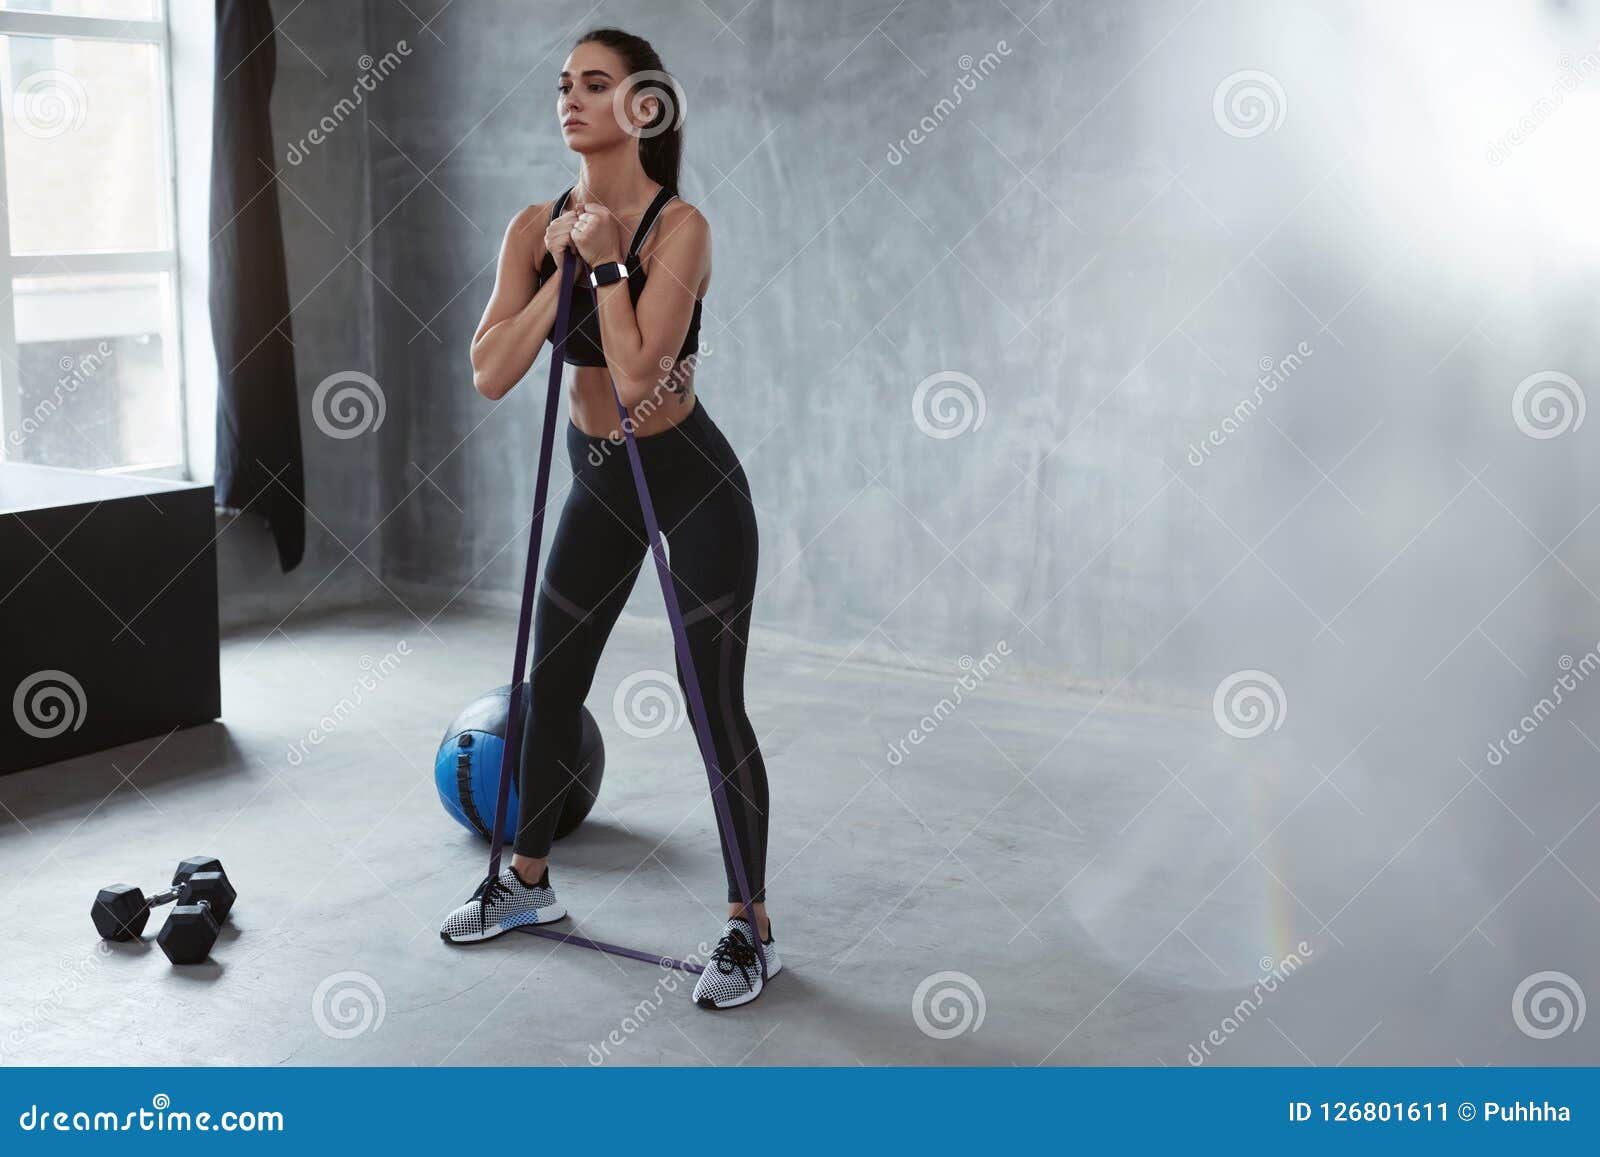 fitness exercise. sports woman exercising with resistance band